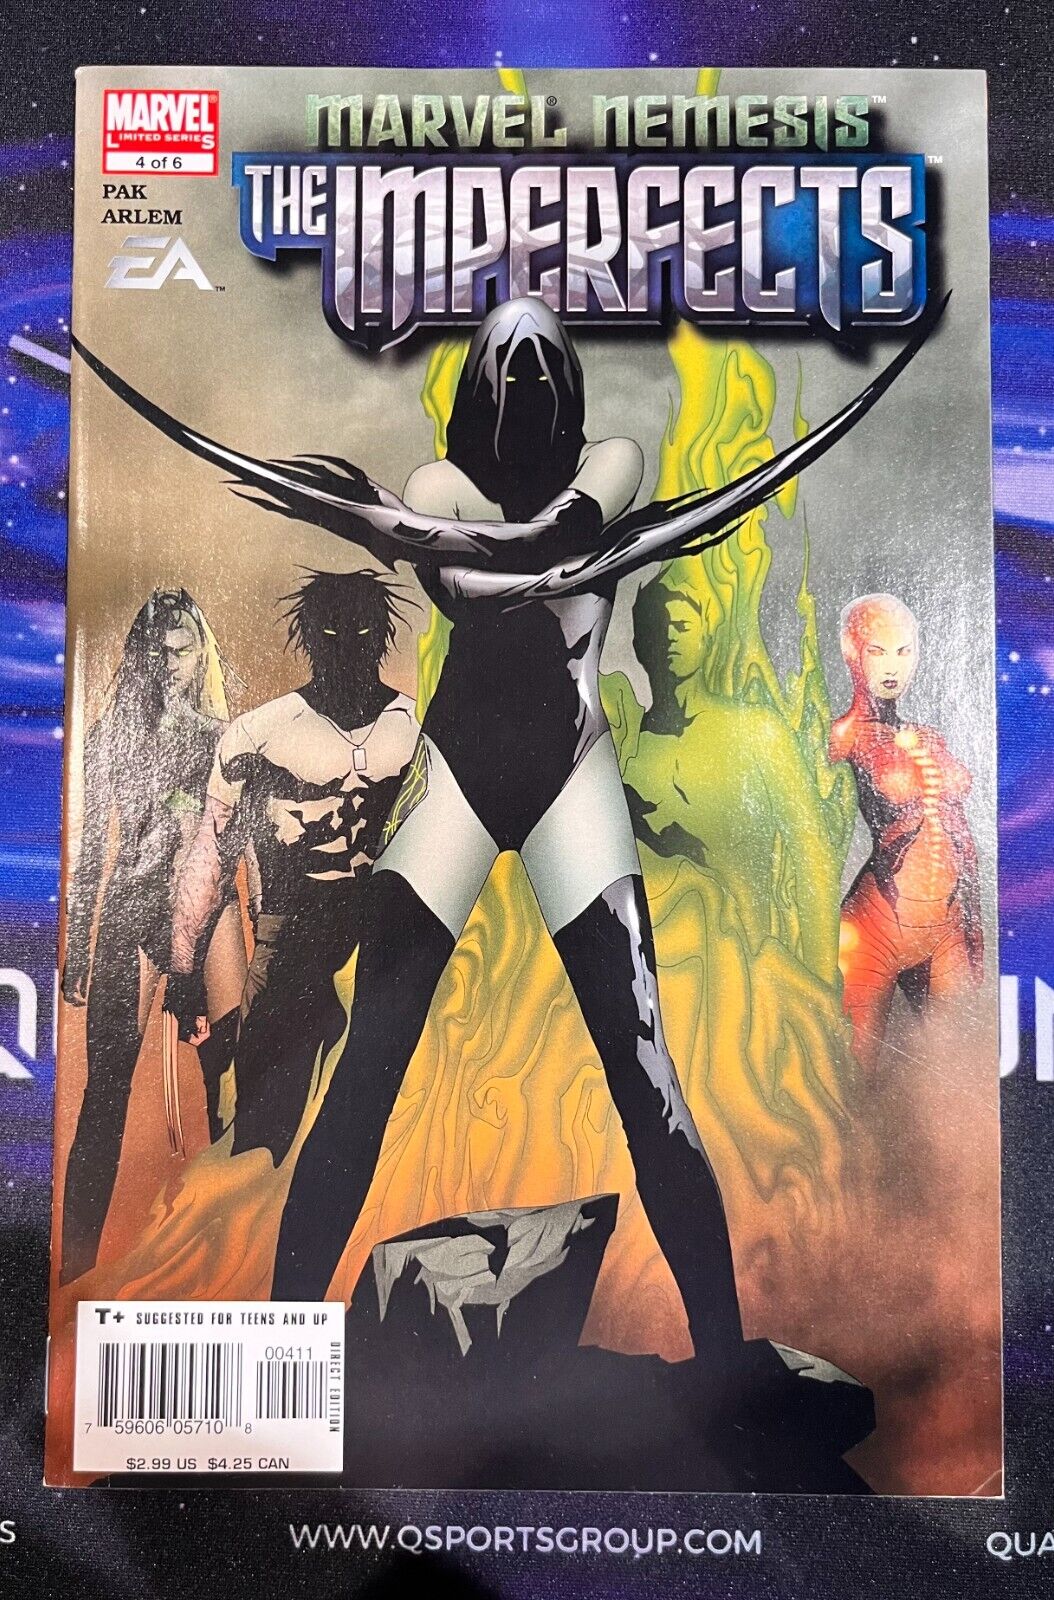 Marvel Nemesis: The Imperfects #4 of 6 MCU Comic Book (W214)